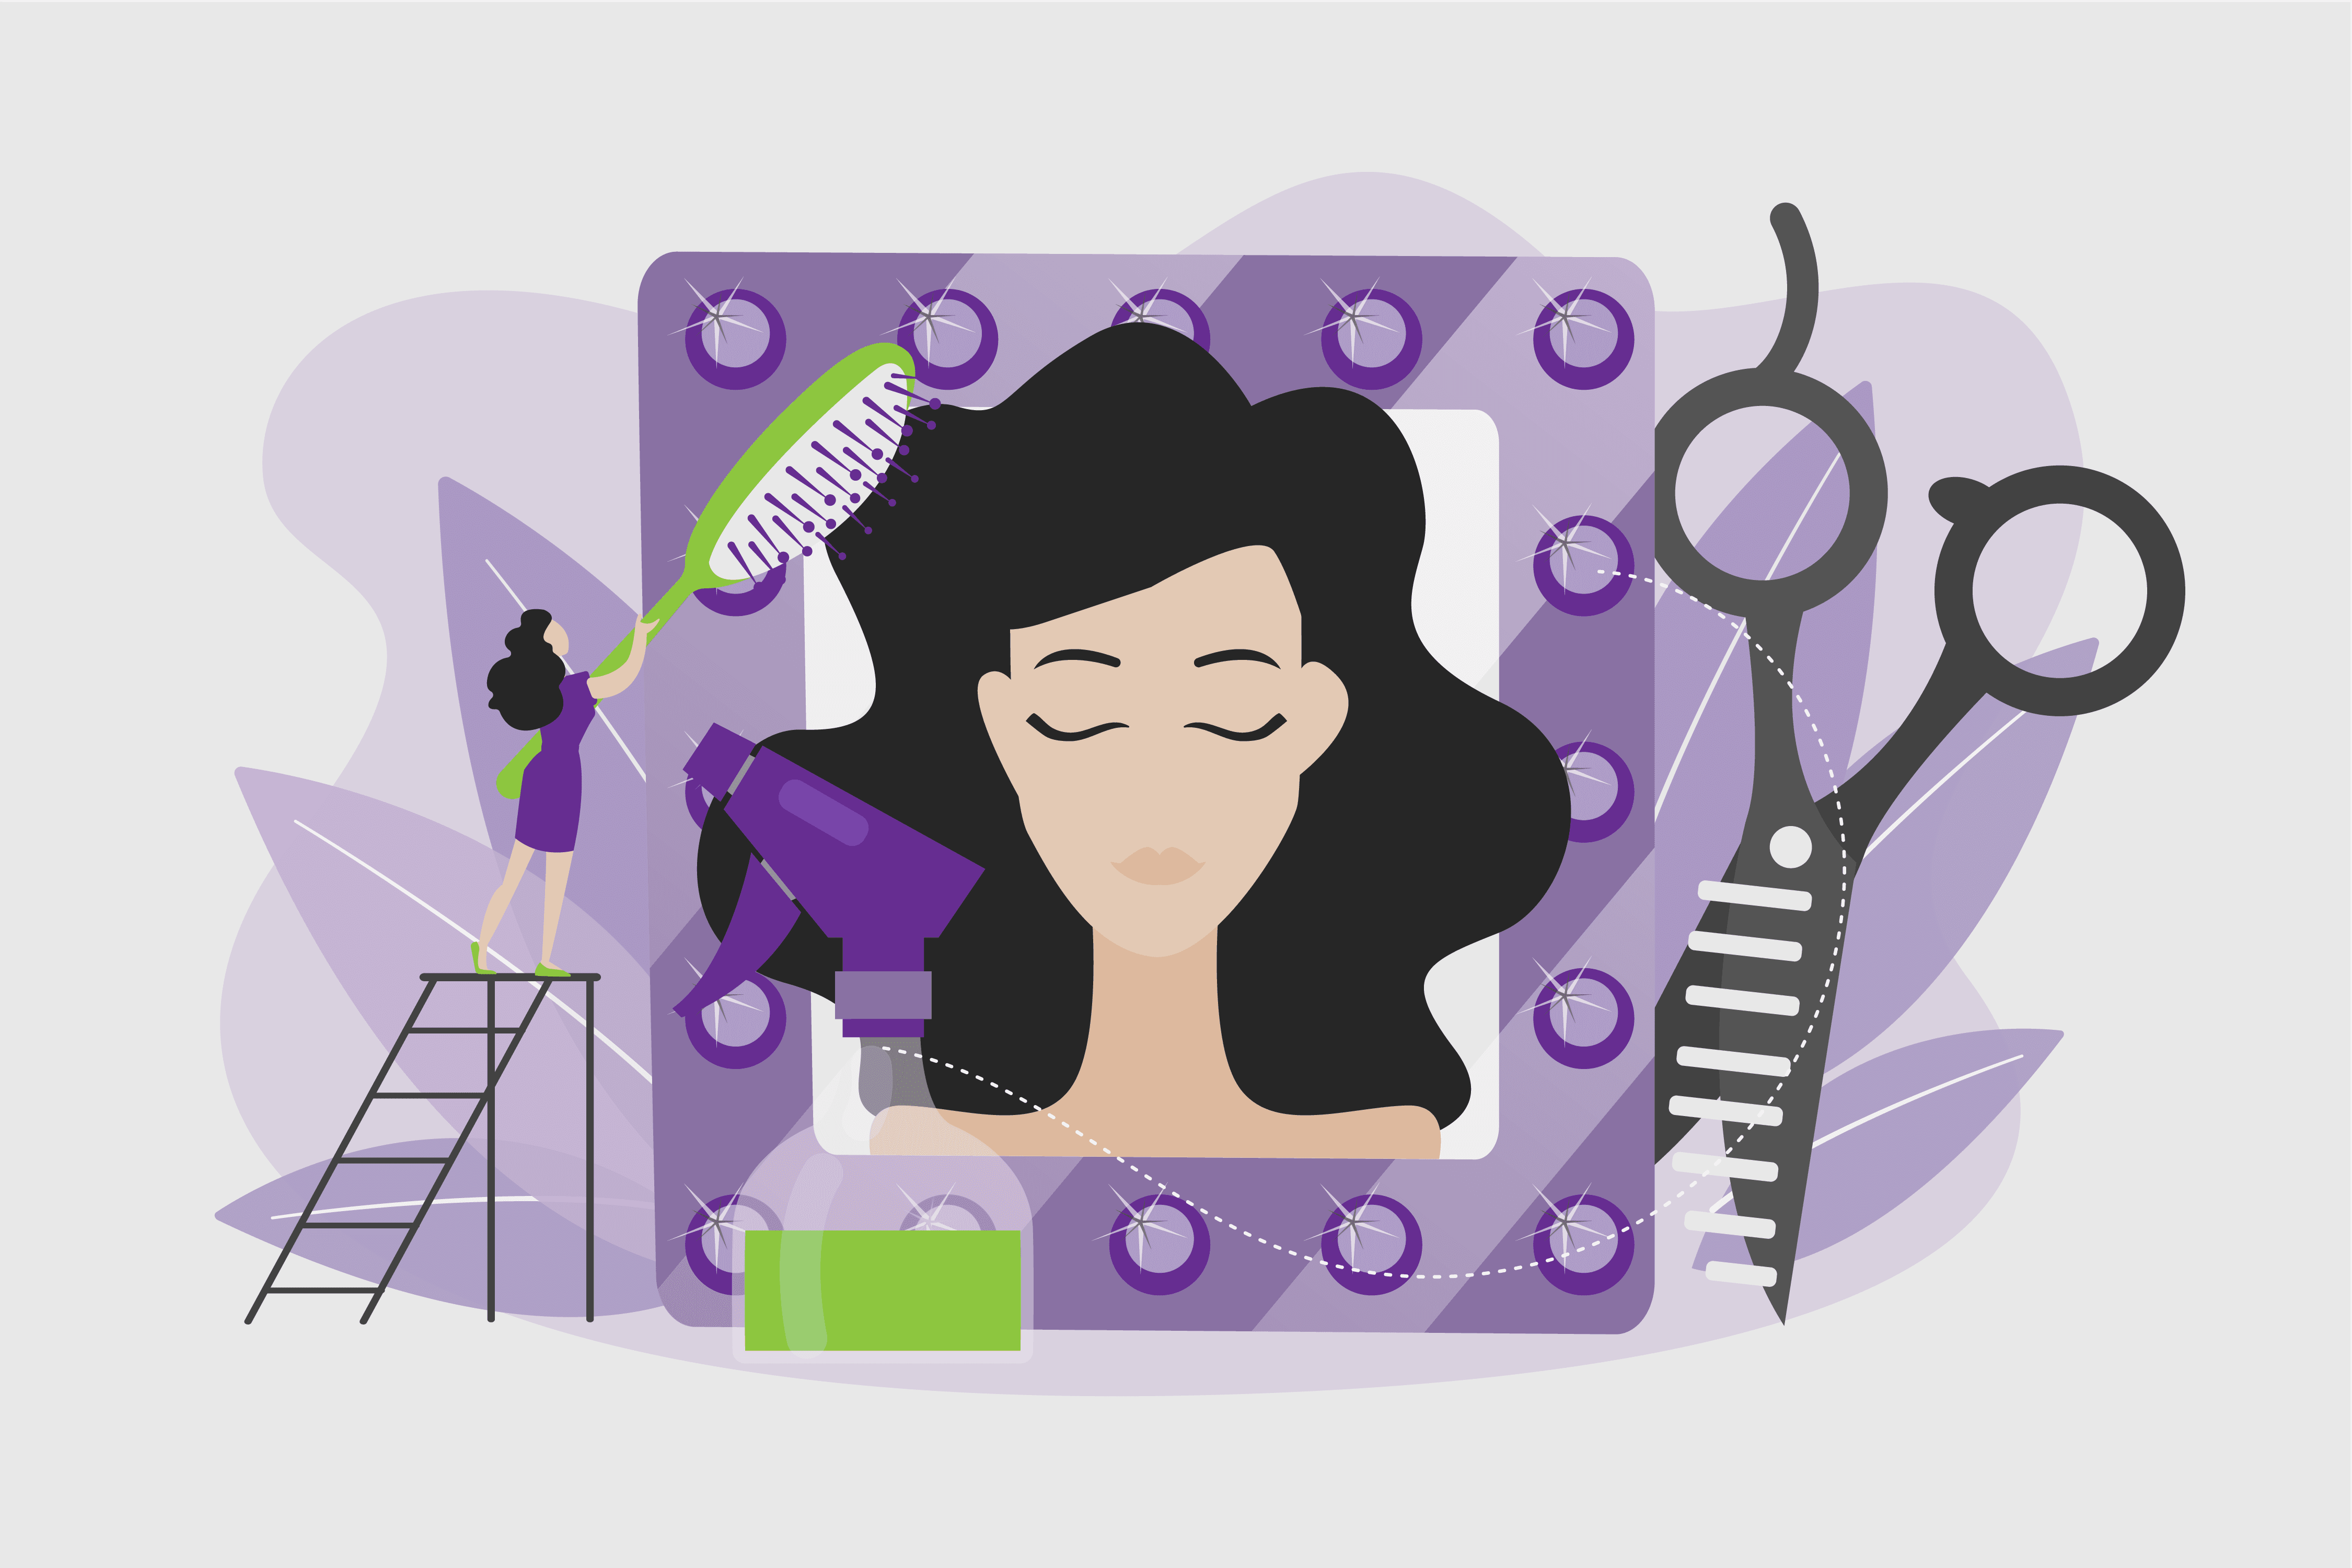 Hairdressing Apprenticeship Guide: Everything you Need to Know